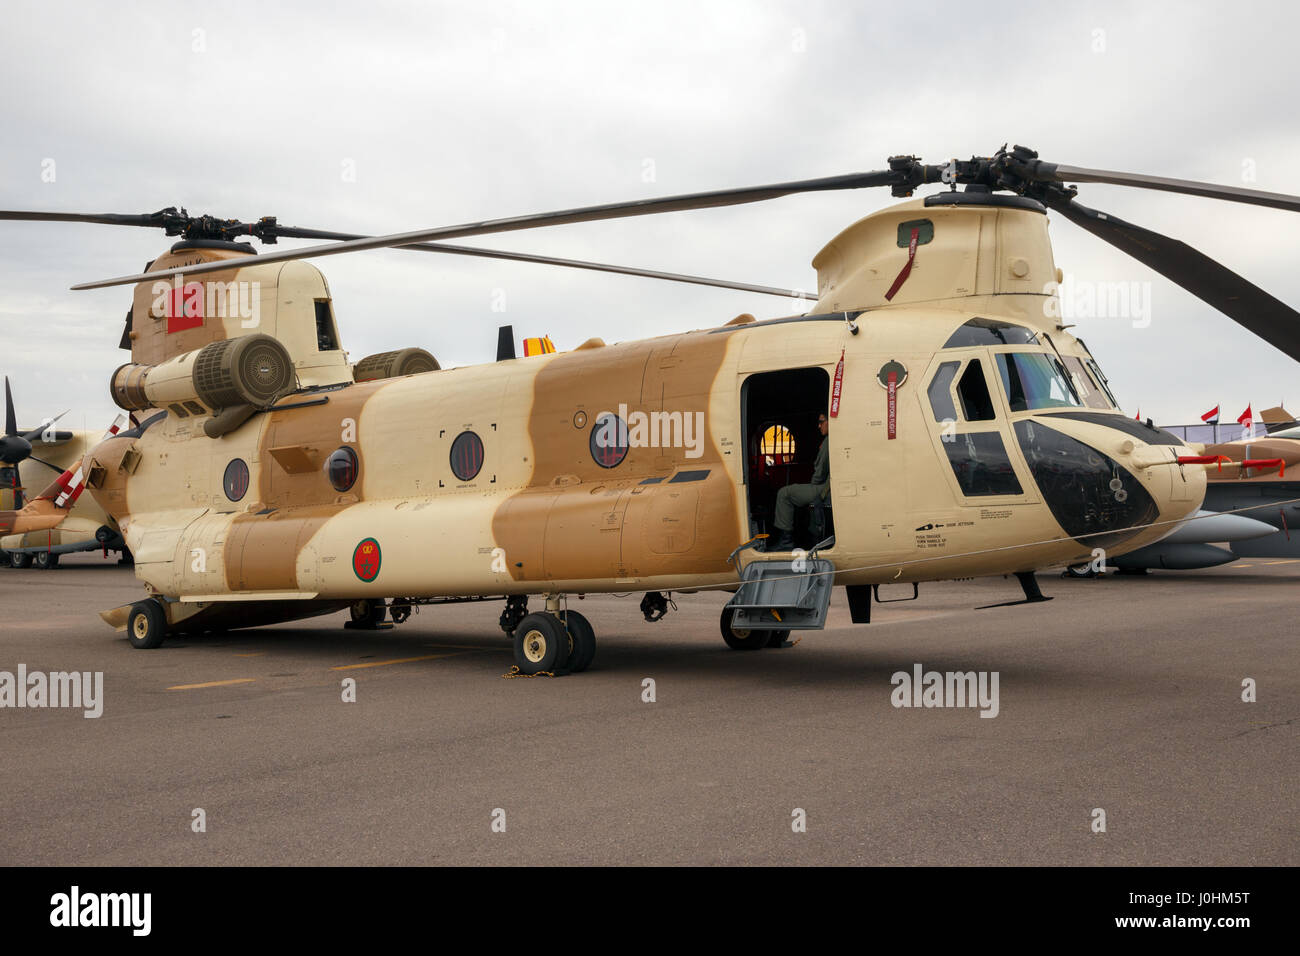 MARRAKECH, MOROCCO - APR 28, 2016: New CH-47D Chinook helicopter at the Marrakech Air Show. Stock Photo